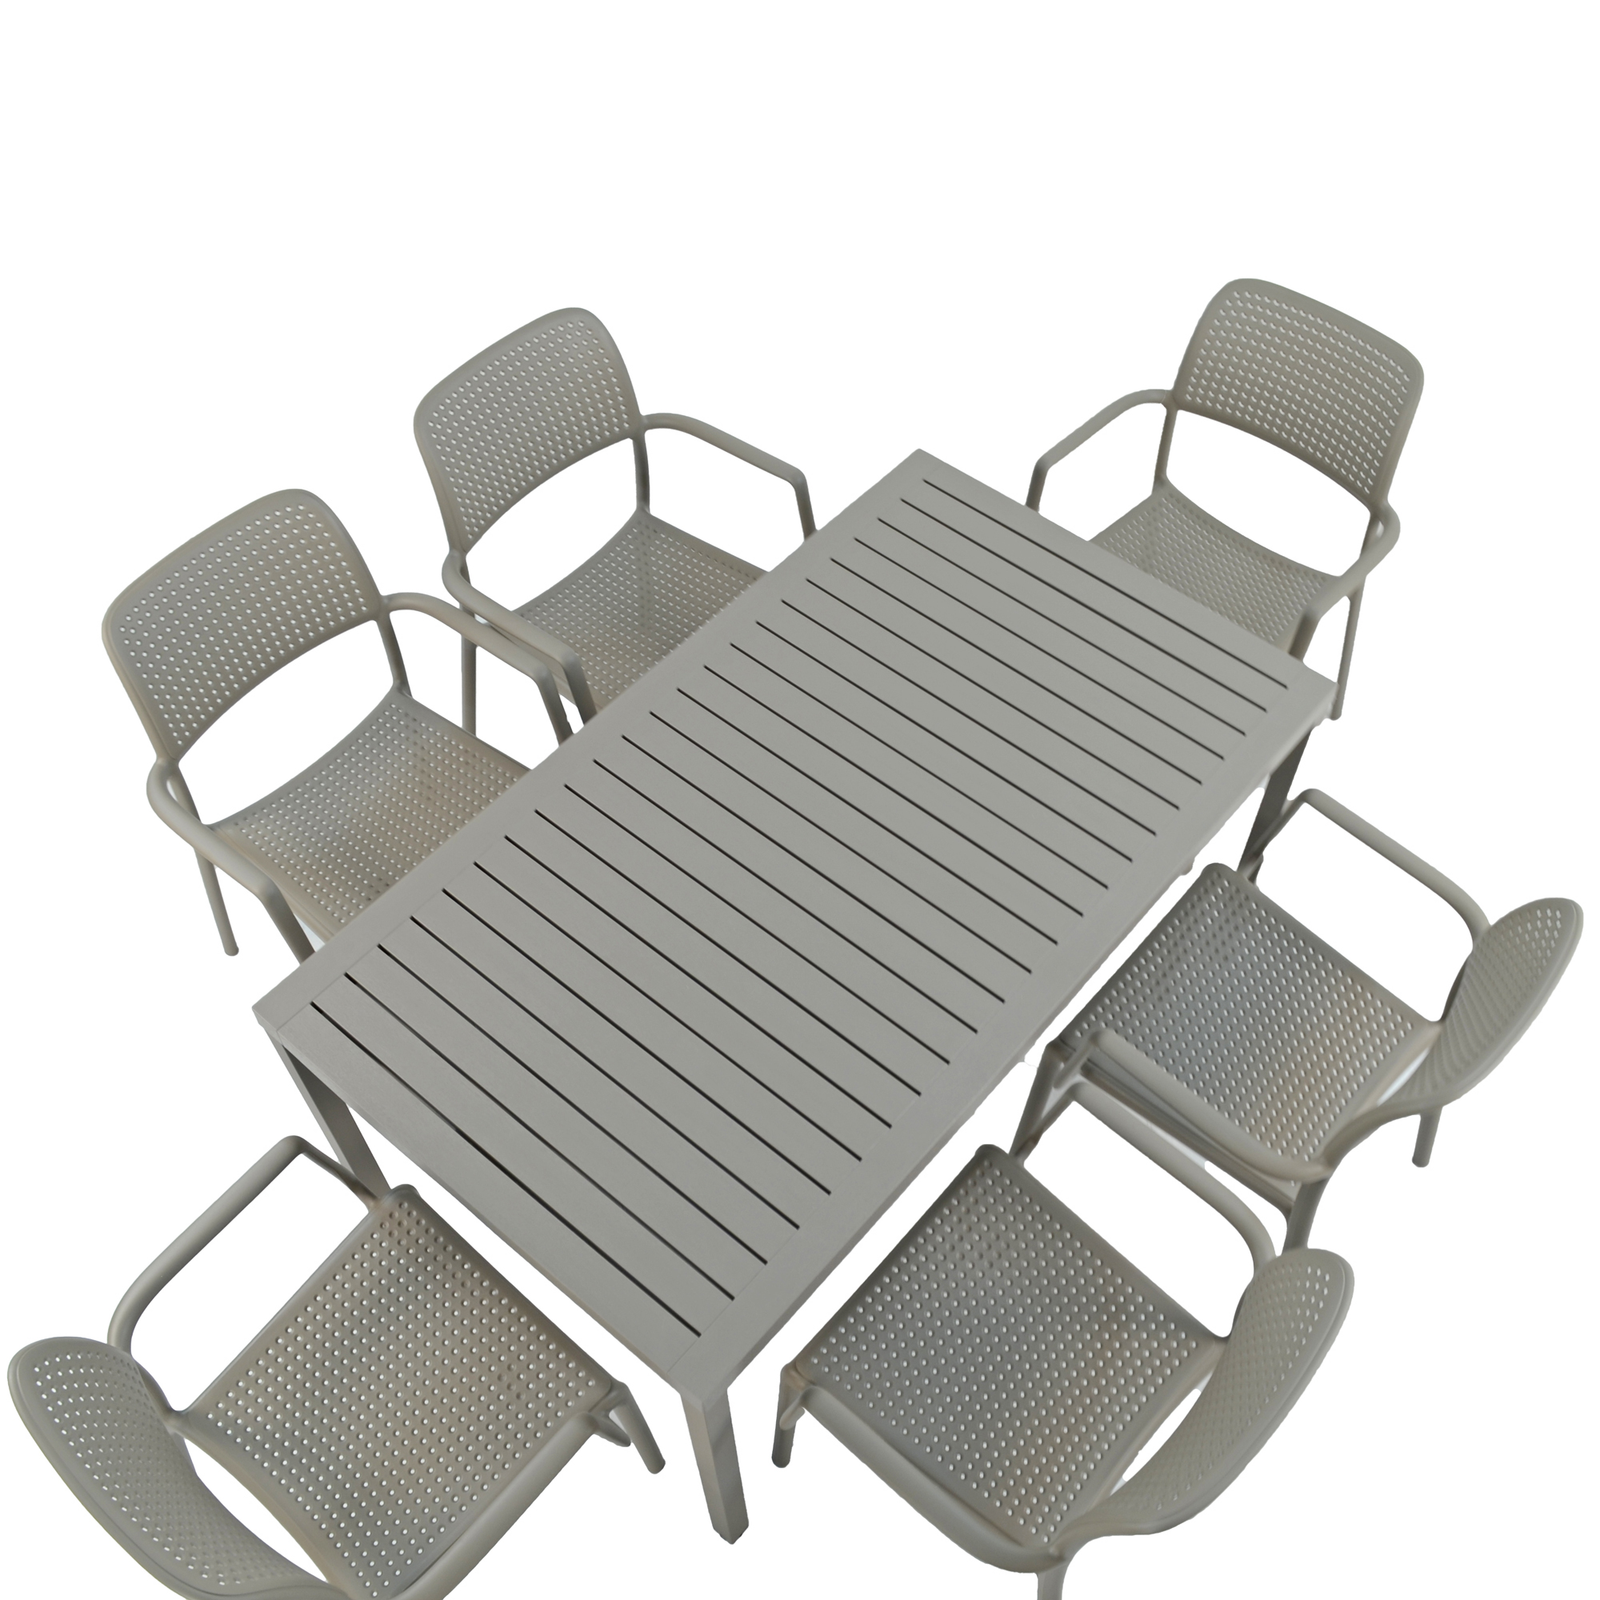 Nardi Cube Garden Dining Table with 6 Bora Chair Set in Turtle Dove Grey Dining Sets Nardi Default Title  